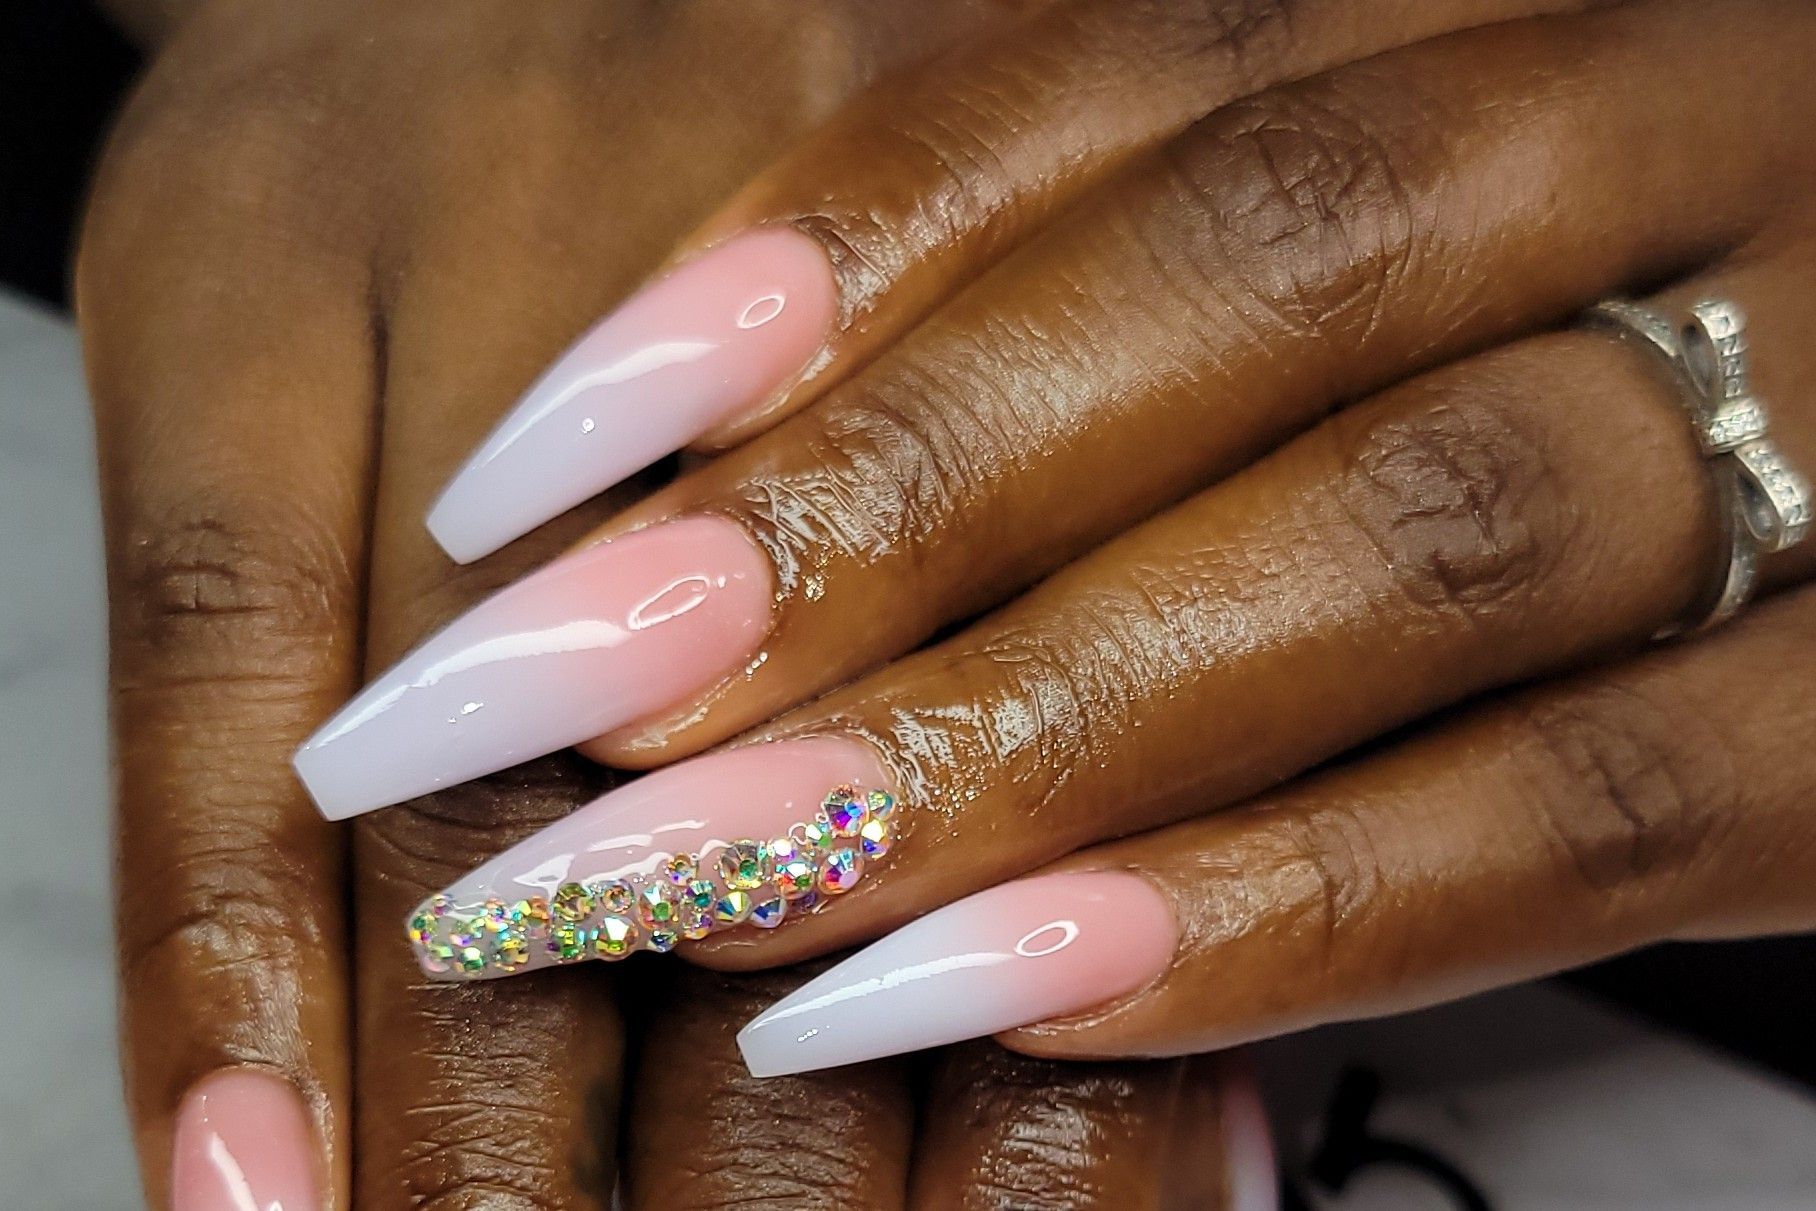 Acrylic Nails Near You in Chicago  Best Places To Get Acrylics in